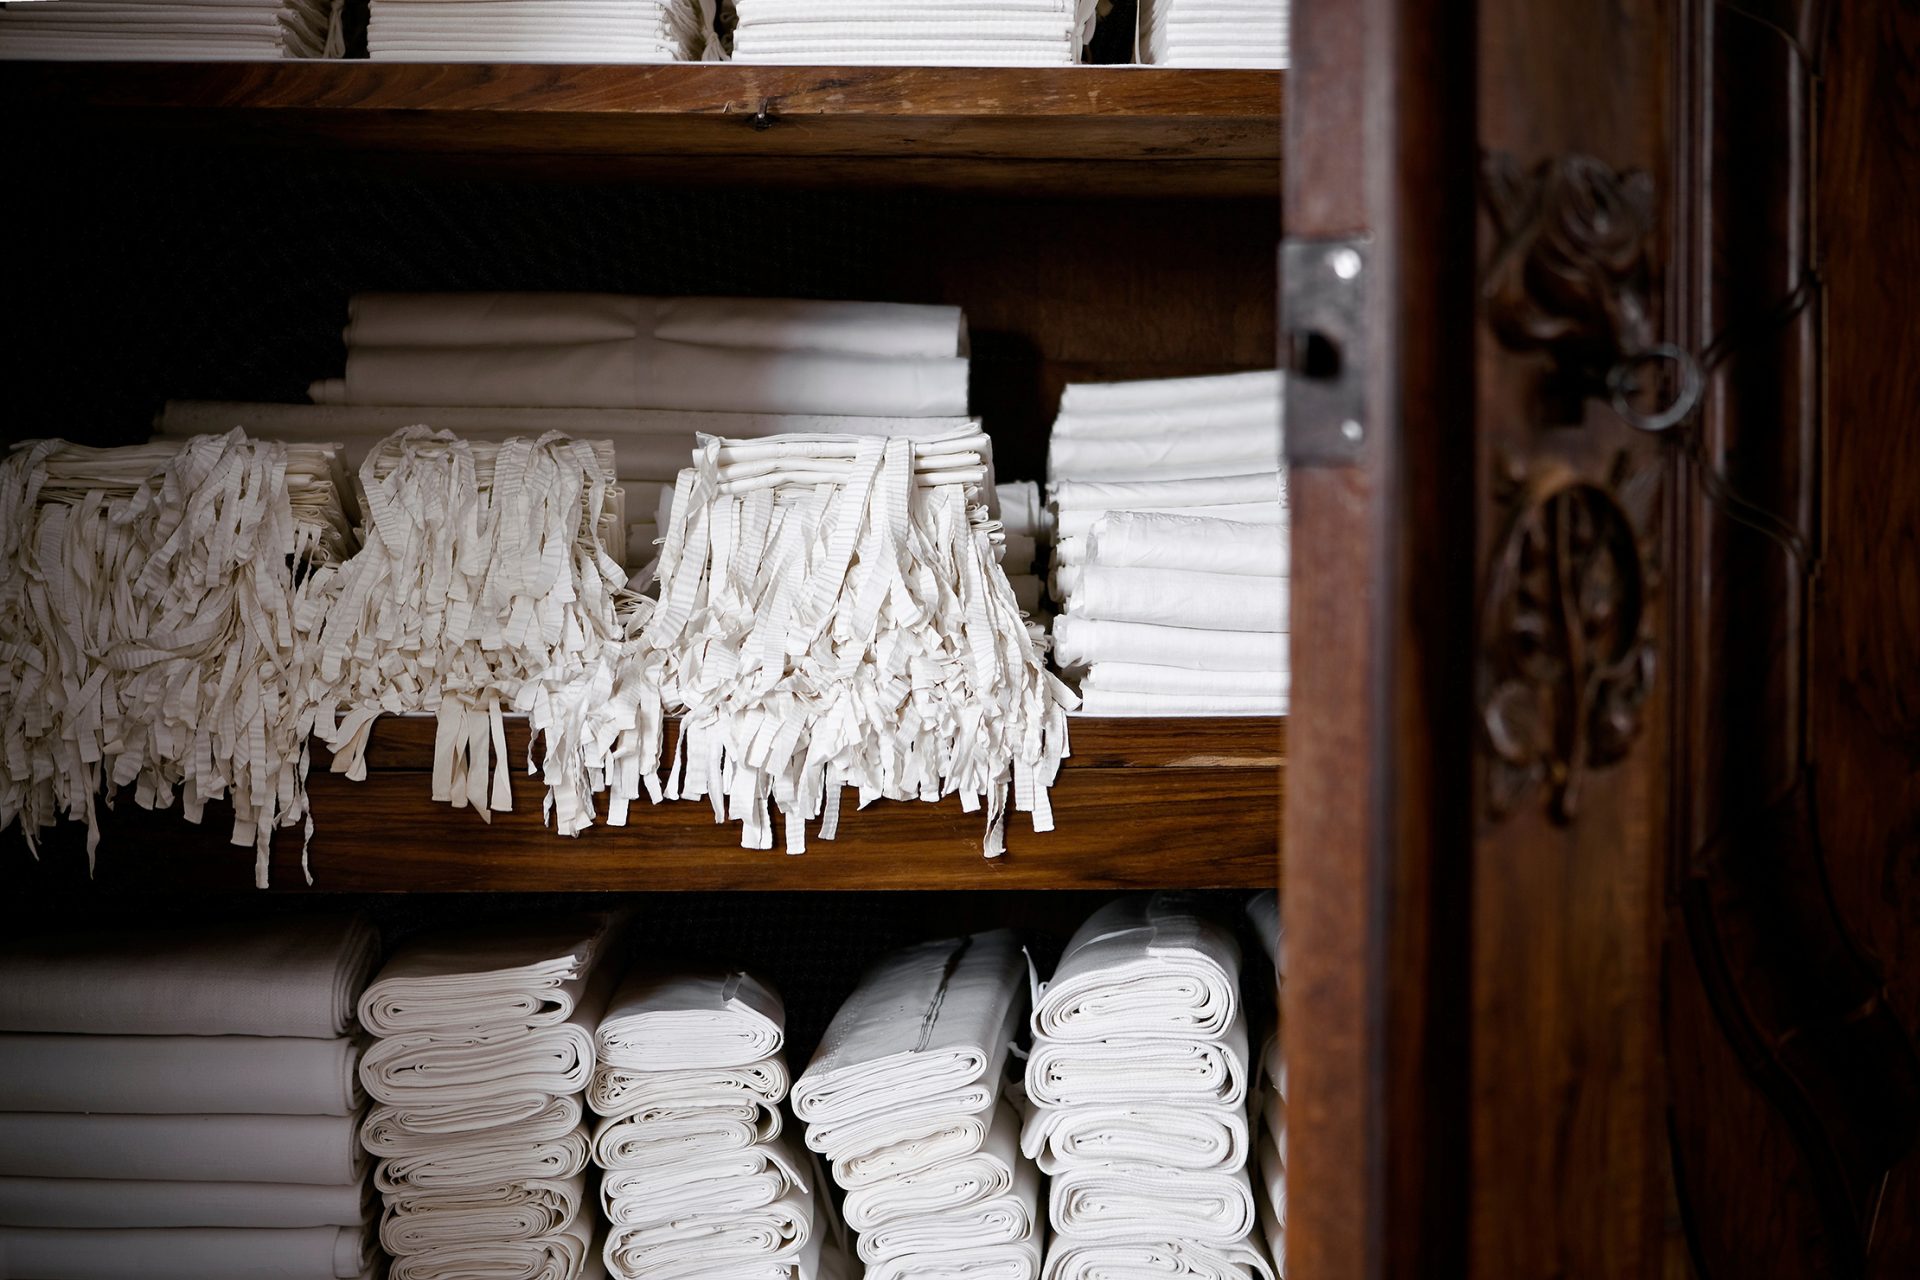 A cabinet filled with bed sheets and pillow covers.